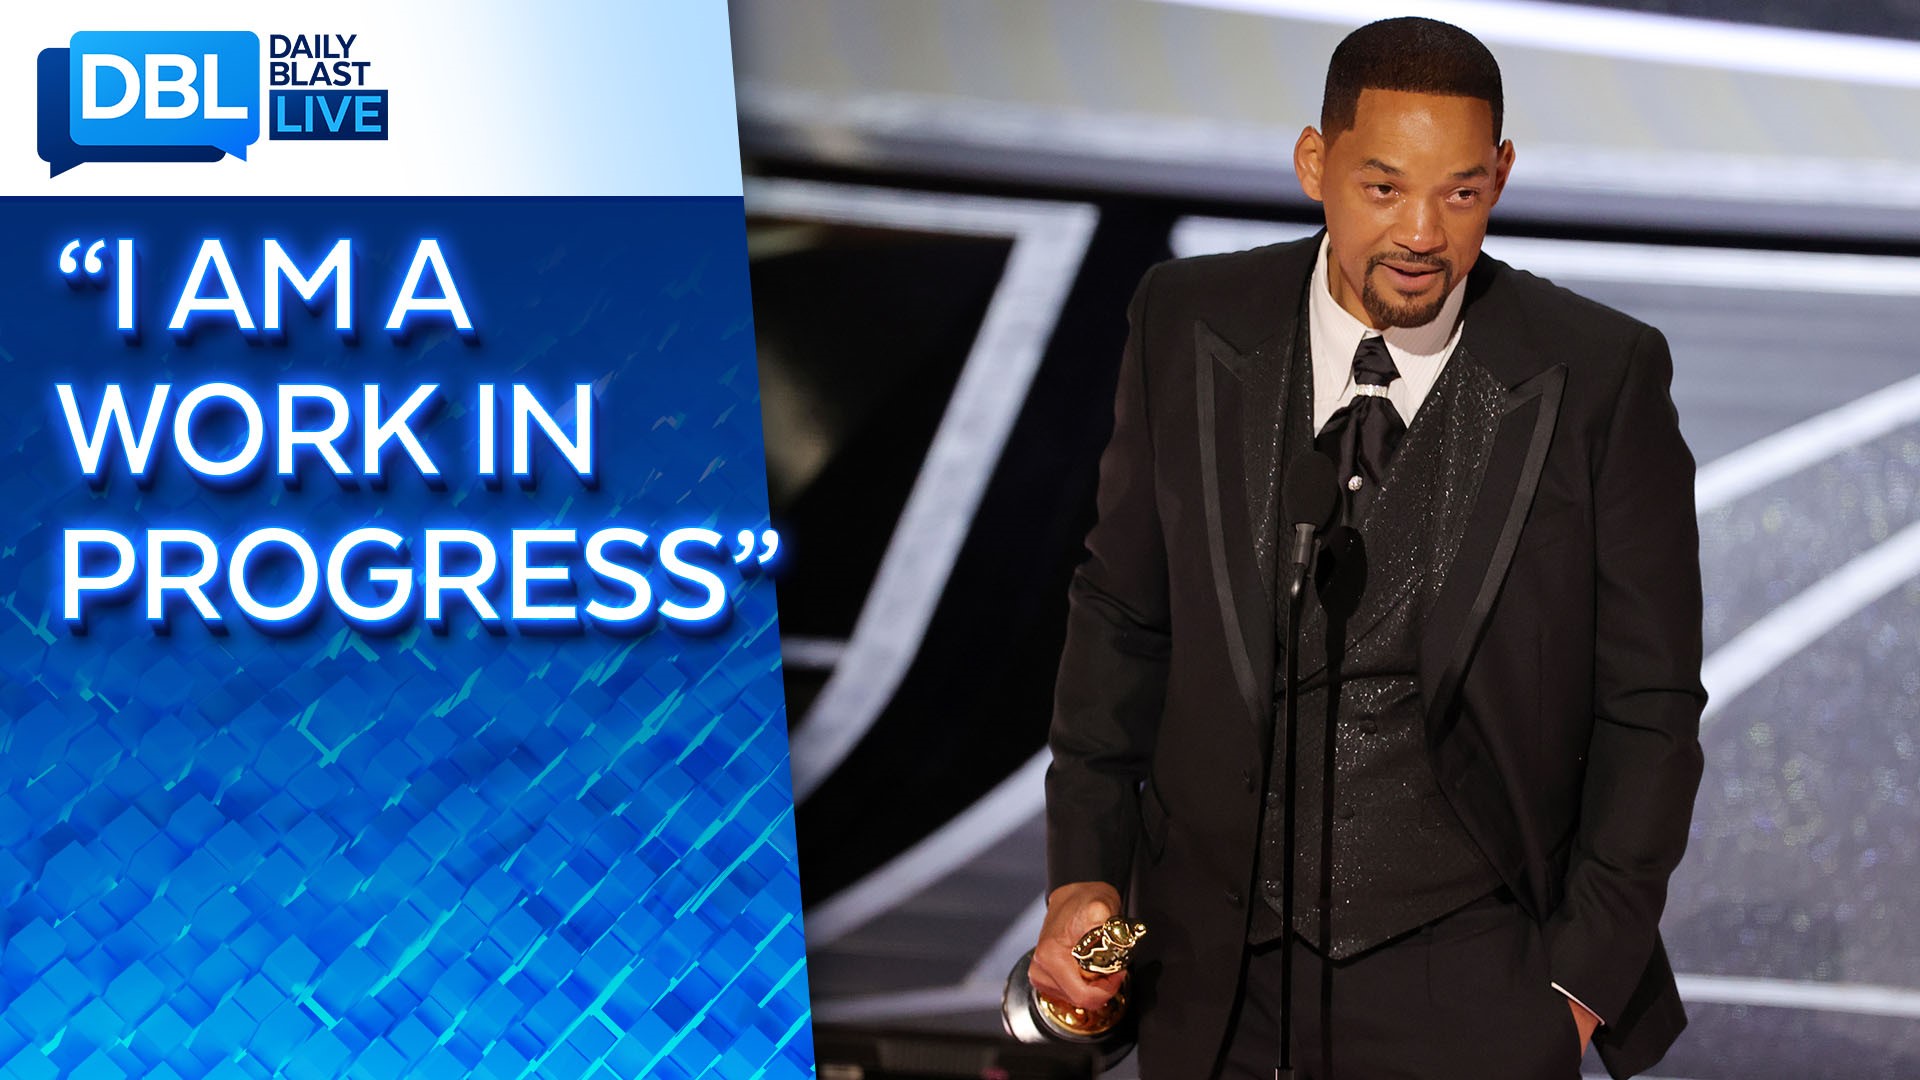 Actor Will Smith took to Instagram on Monday to apologize for his "unacceptable and inexcusable" actions at the Oscars a day earlier.